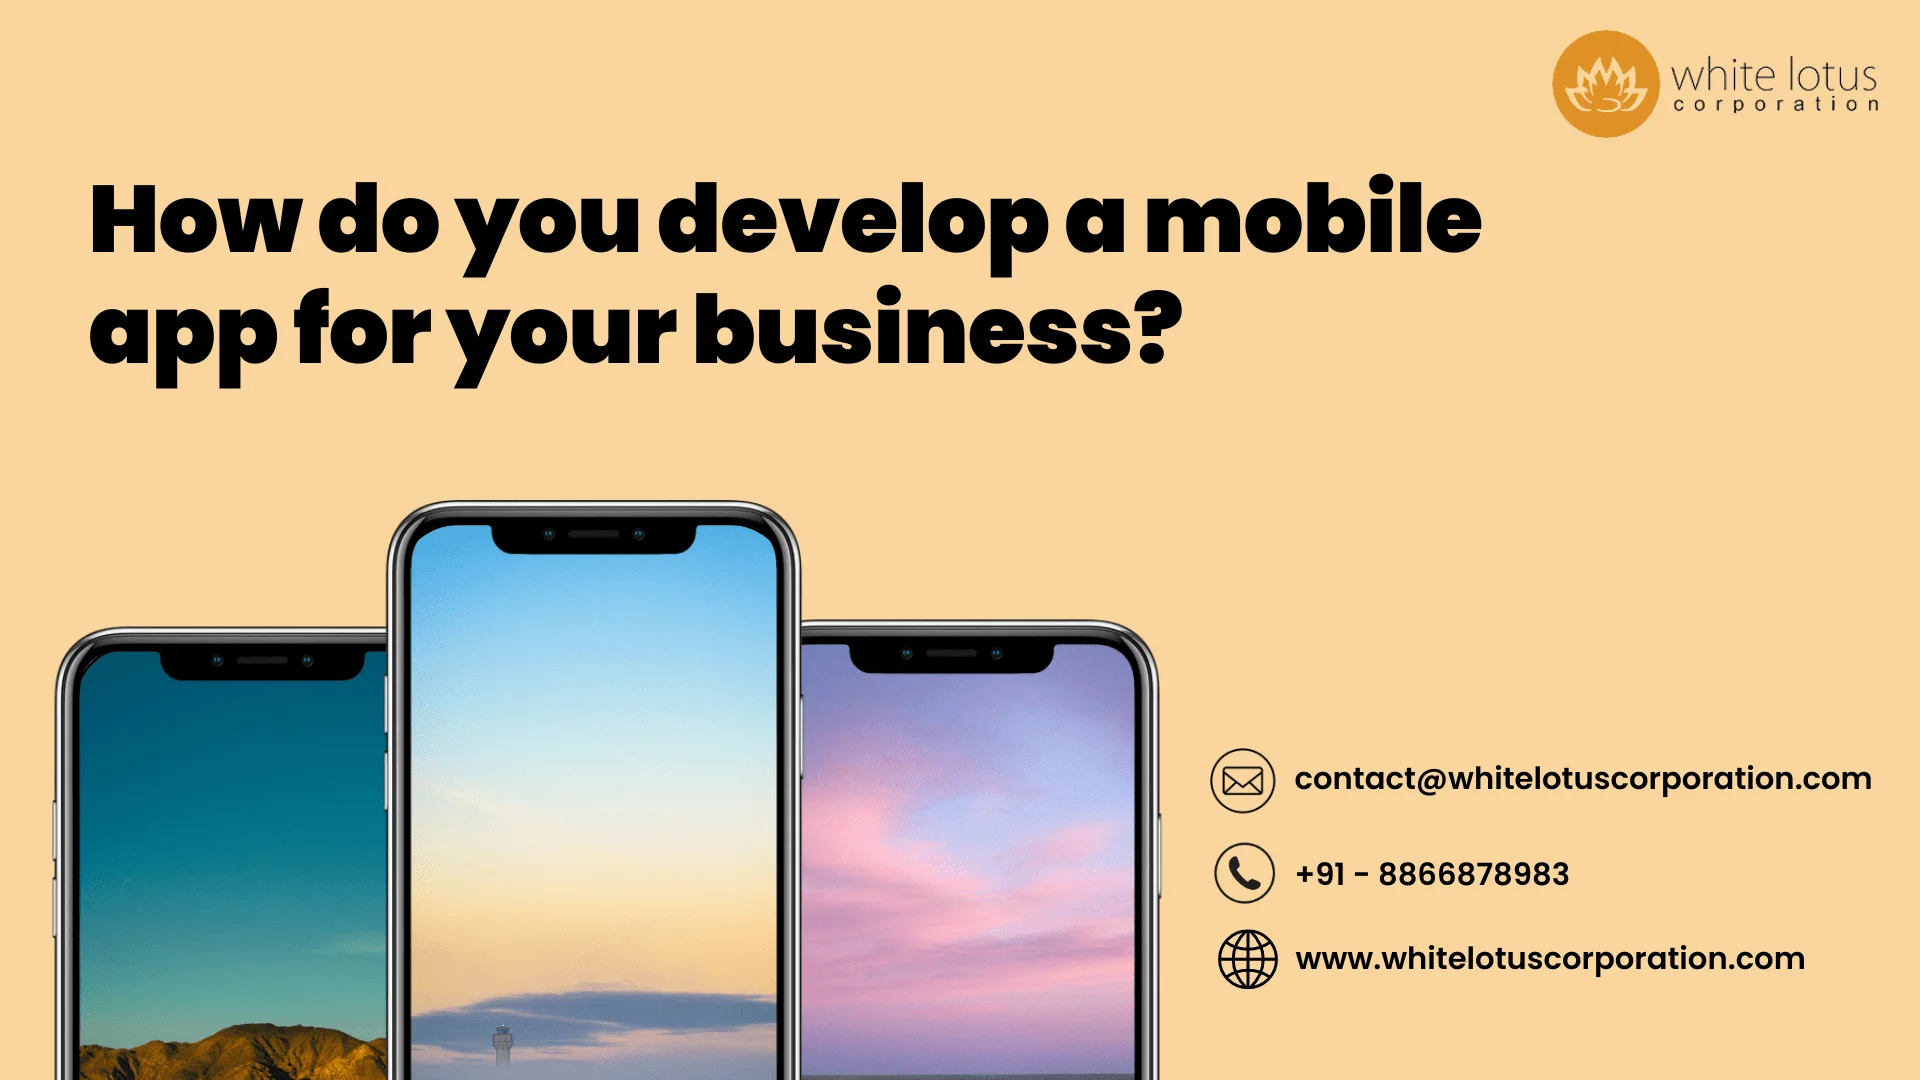 How do you-develop a mobile app for your business